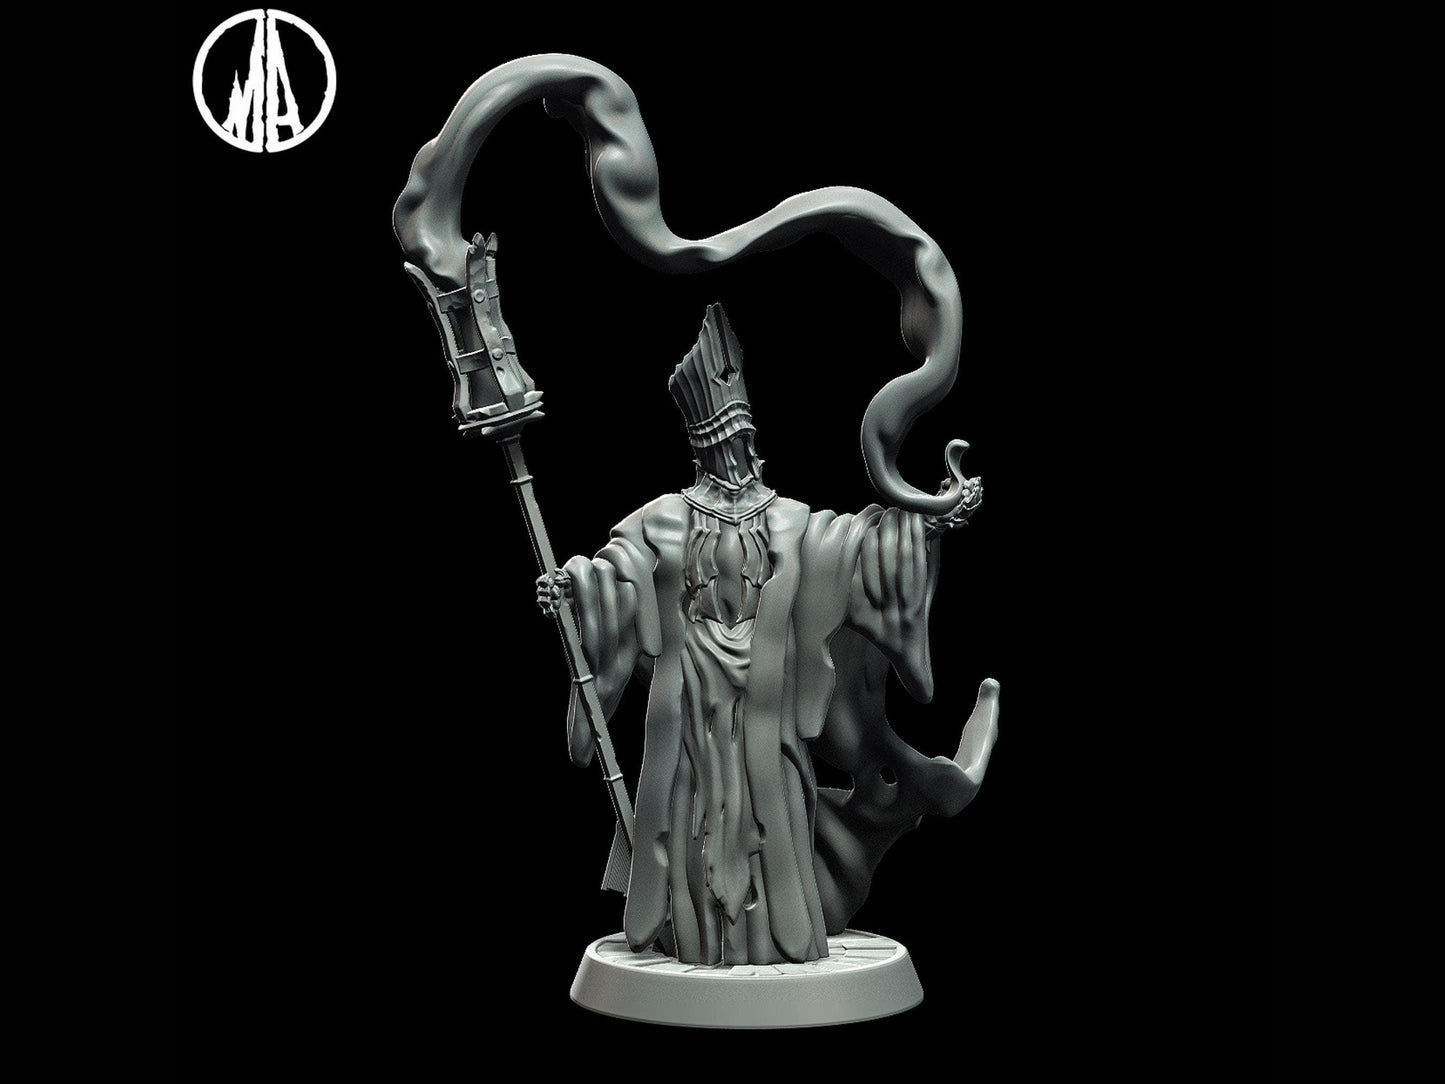 Insane Cleric Miniature witch miniature - 3 Poses - 28mm scale Tabletop gaming DnD Miniature Dungeons and Dragons, ttrpg dnd 5e - Plague Miniatures shop for DnD Miniatures